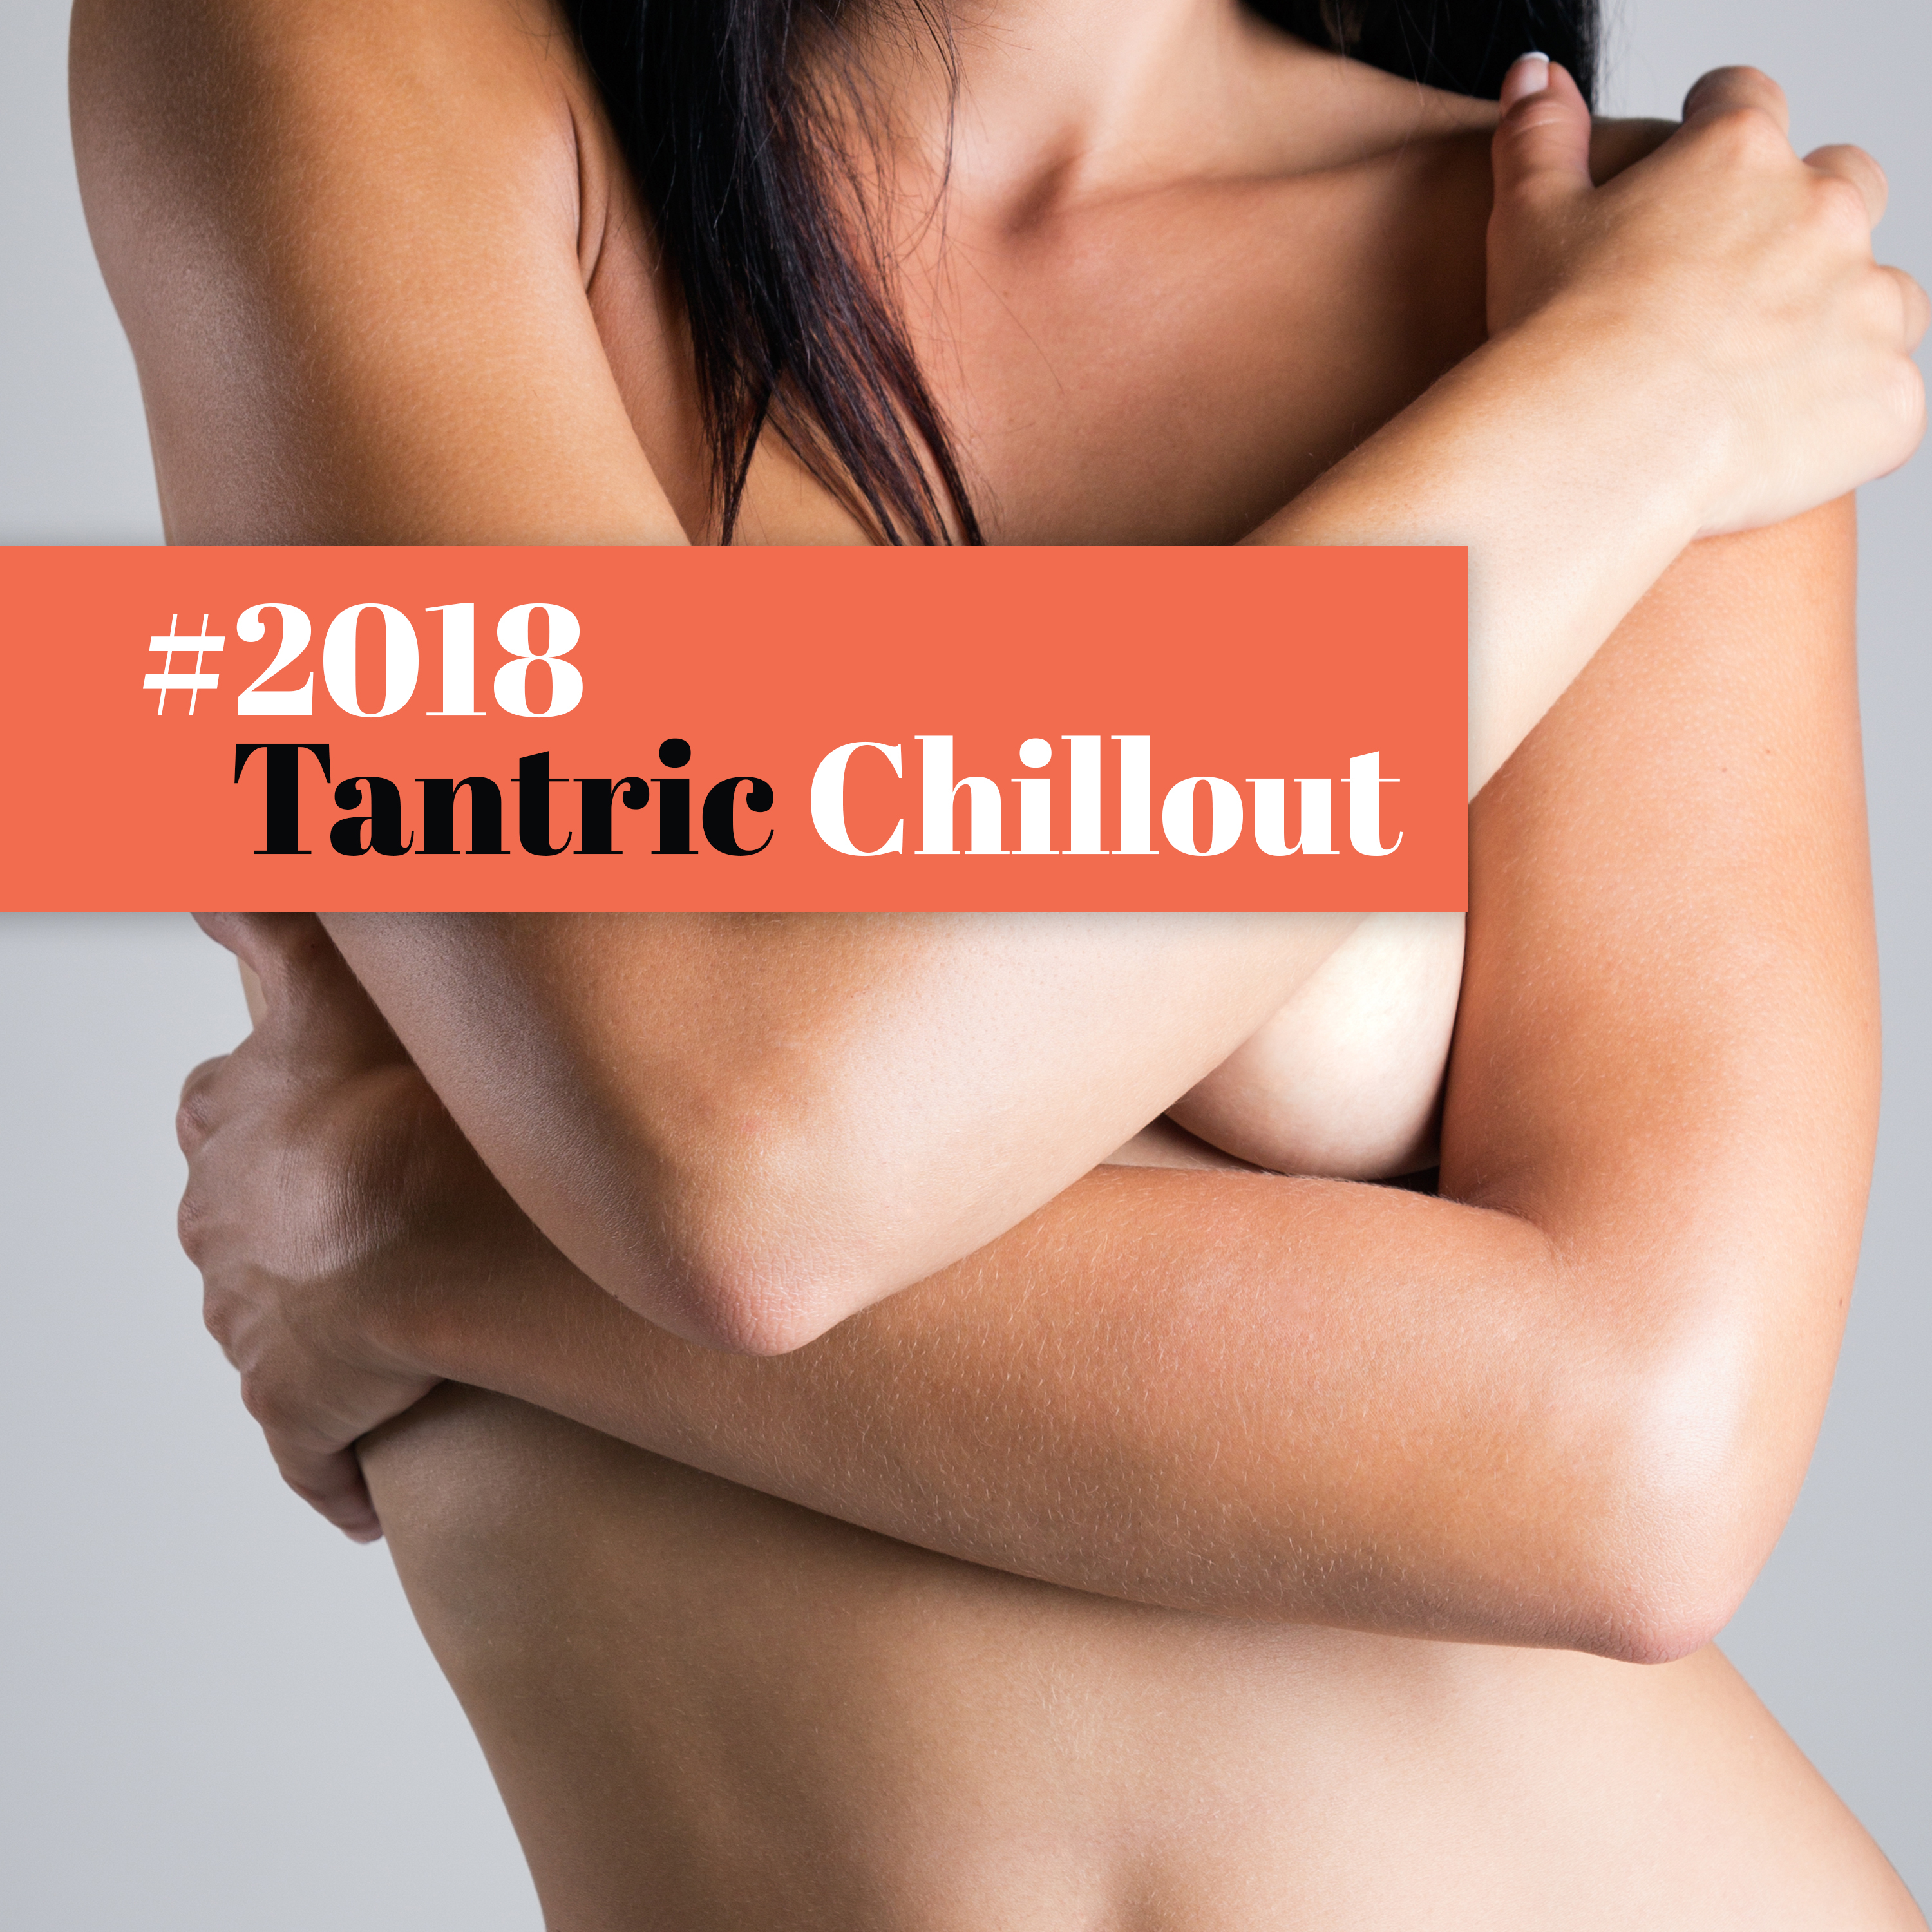 #2018 Tantric Chillout